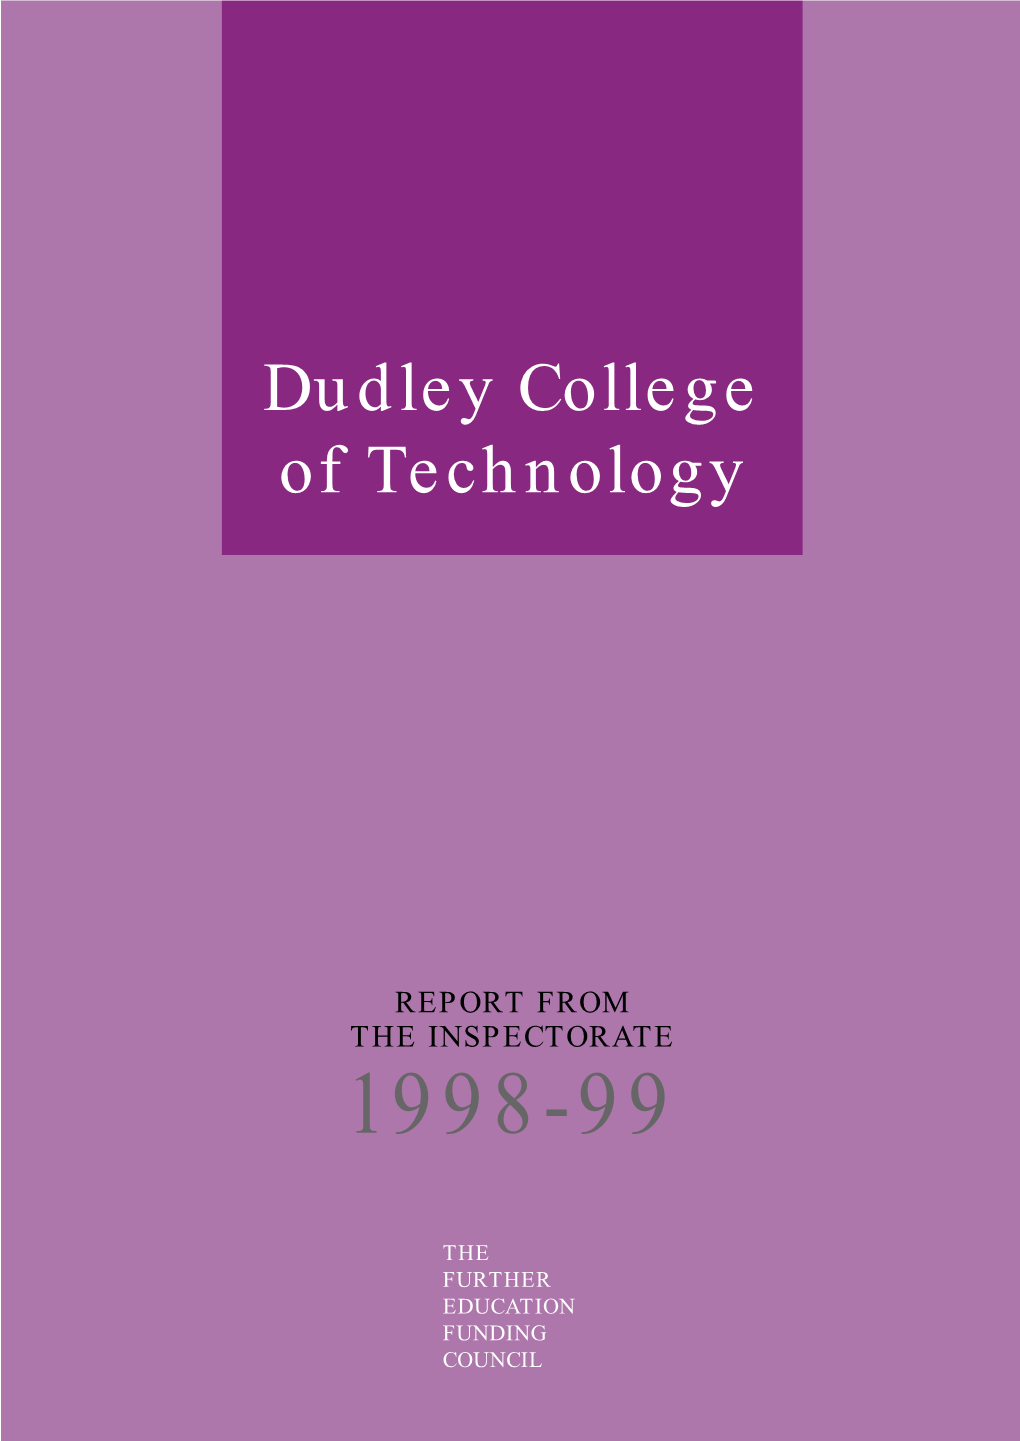 Dudley College of Technology Inspection Report 1998